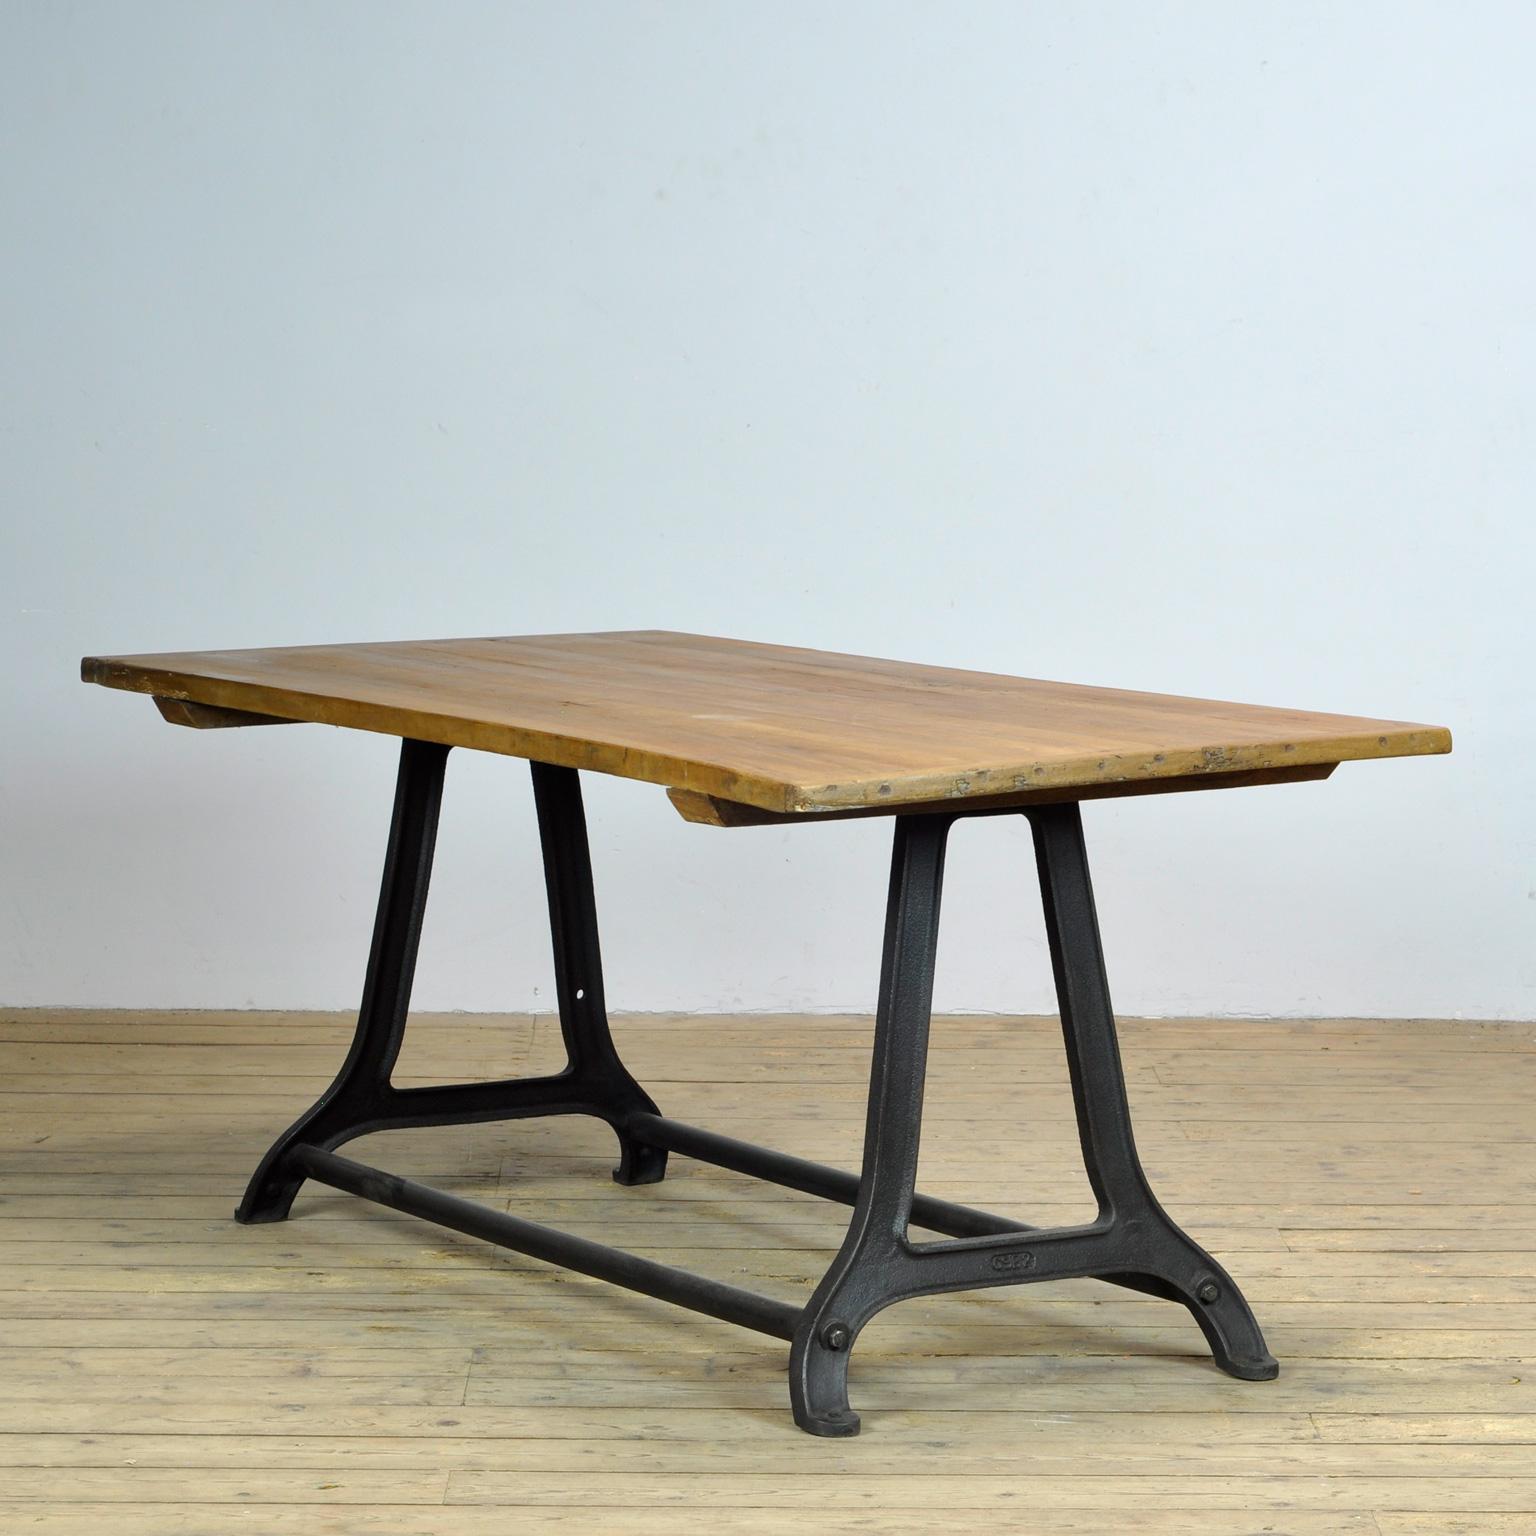 The table is made from an old industrial cast iron machine base and a old pine top.